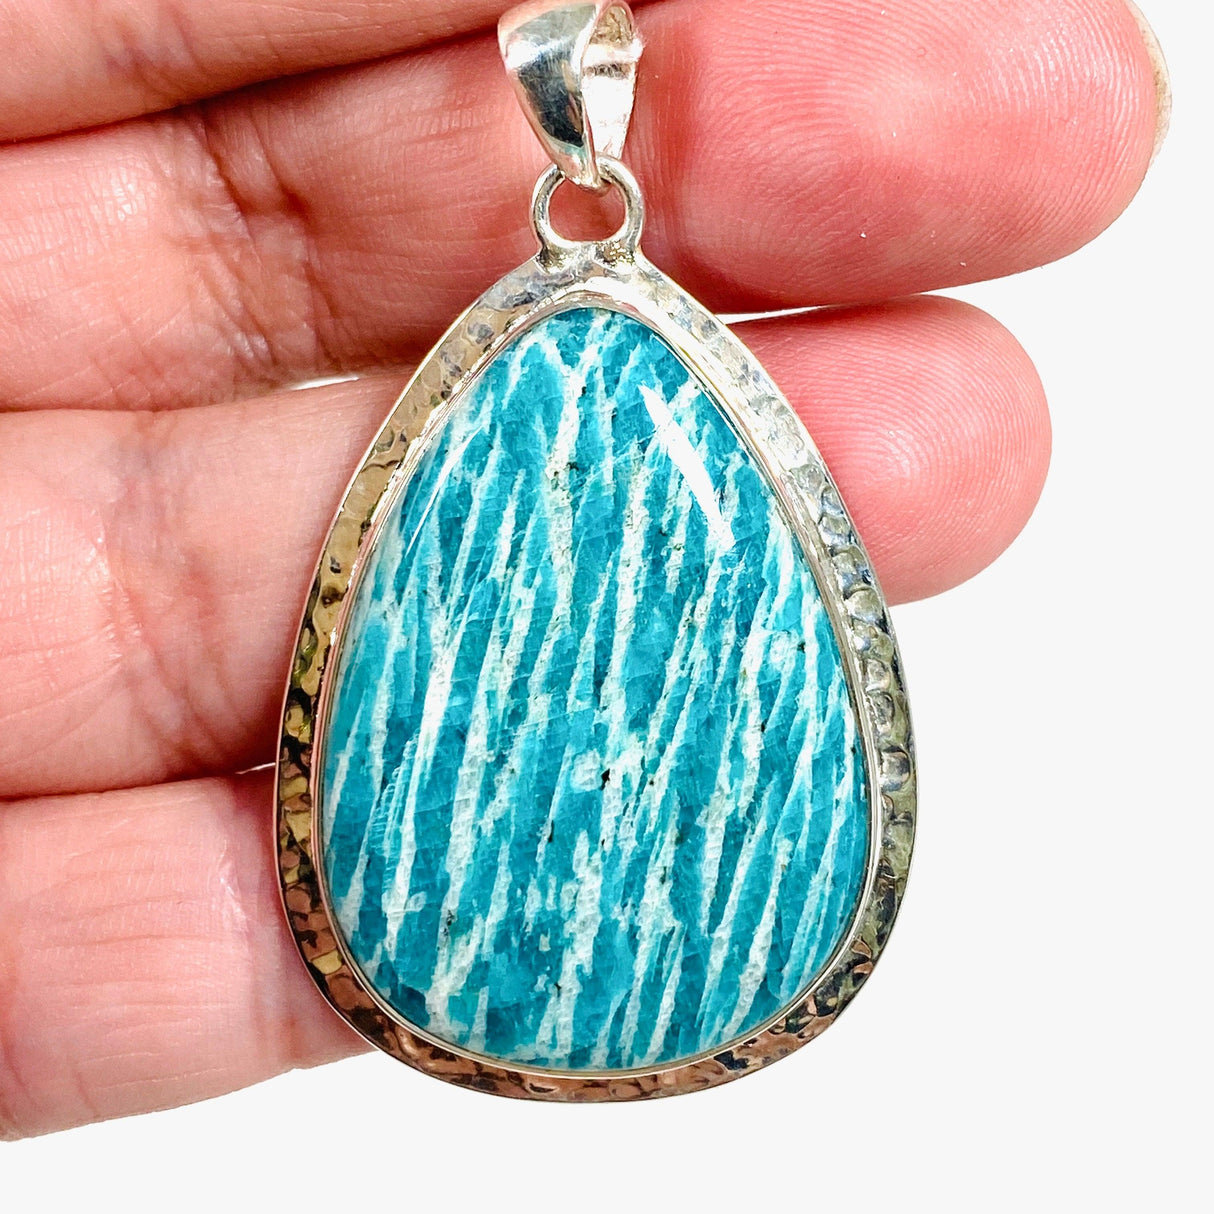 Amazonite teardrop pendant with a hammered setting KPGJ3754 - Nature's Magick